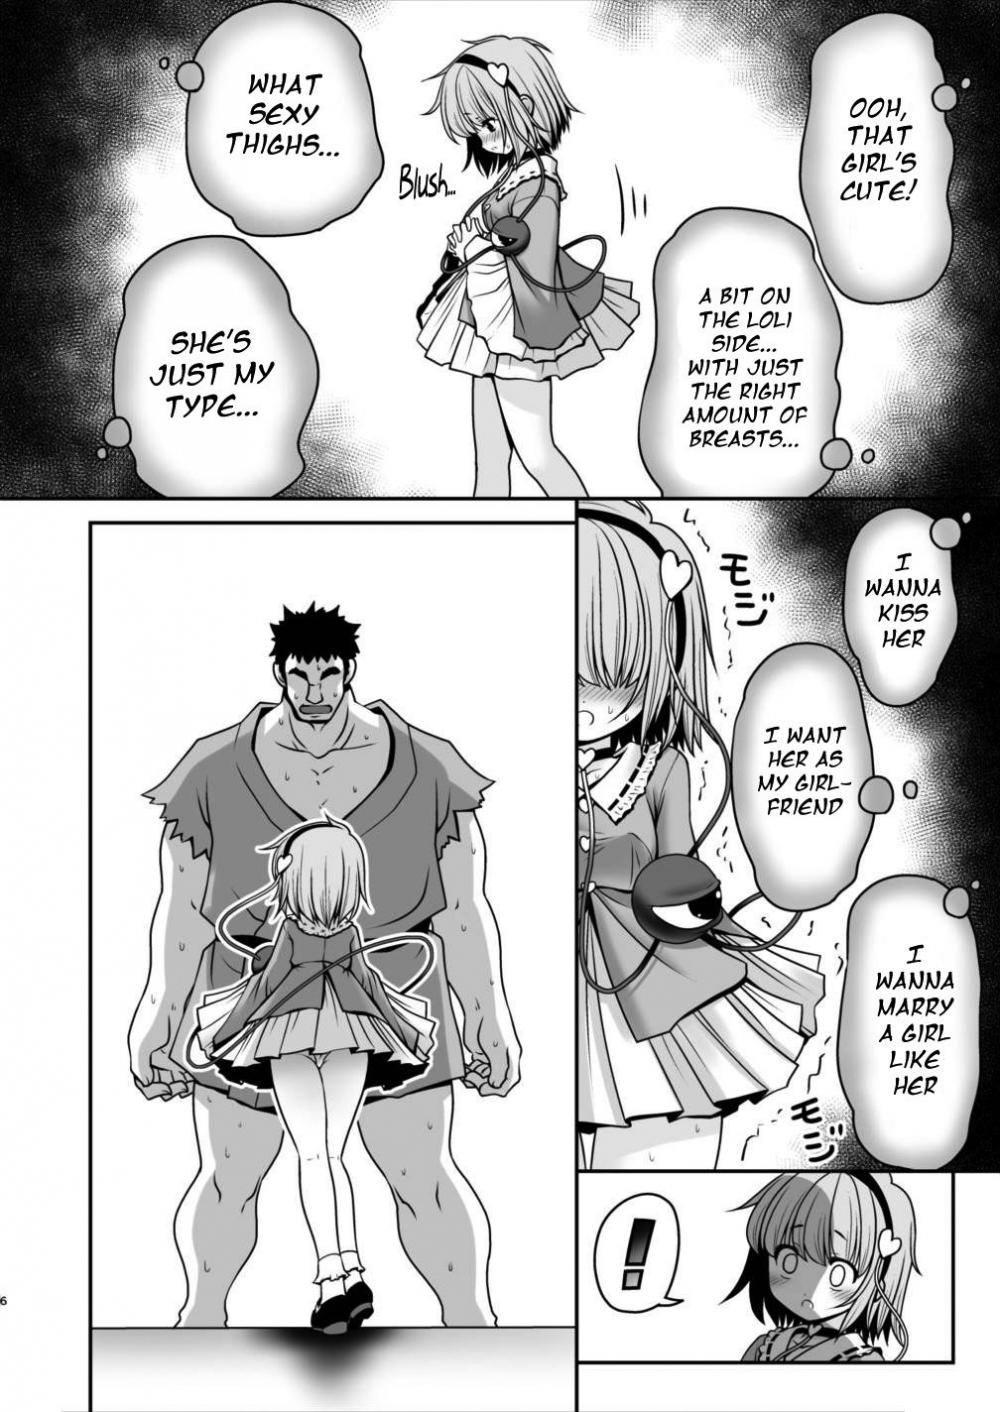 Hentai Manga Comic-Body of Enlightenment Save to Perverted Mind ver1.1-Read-3